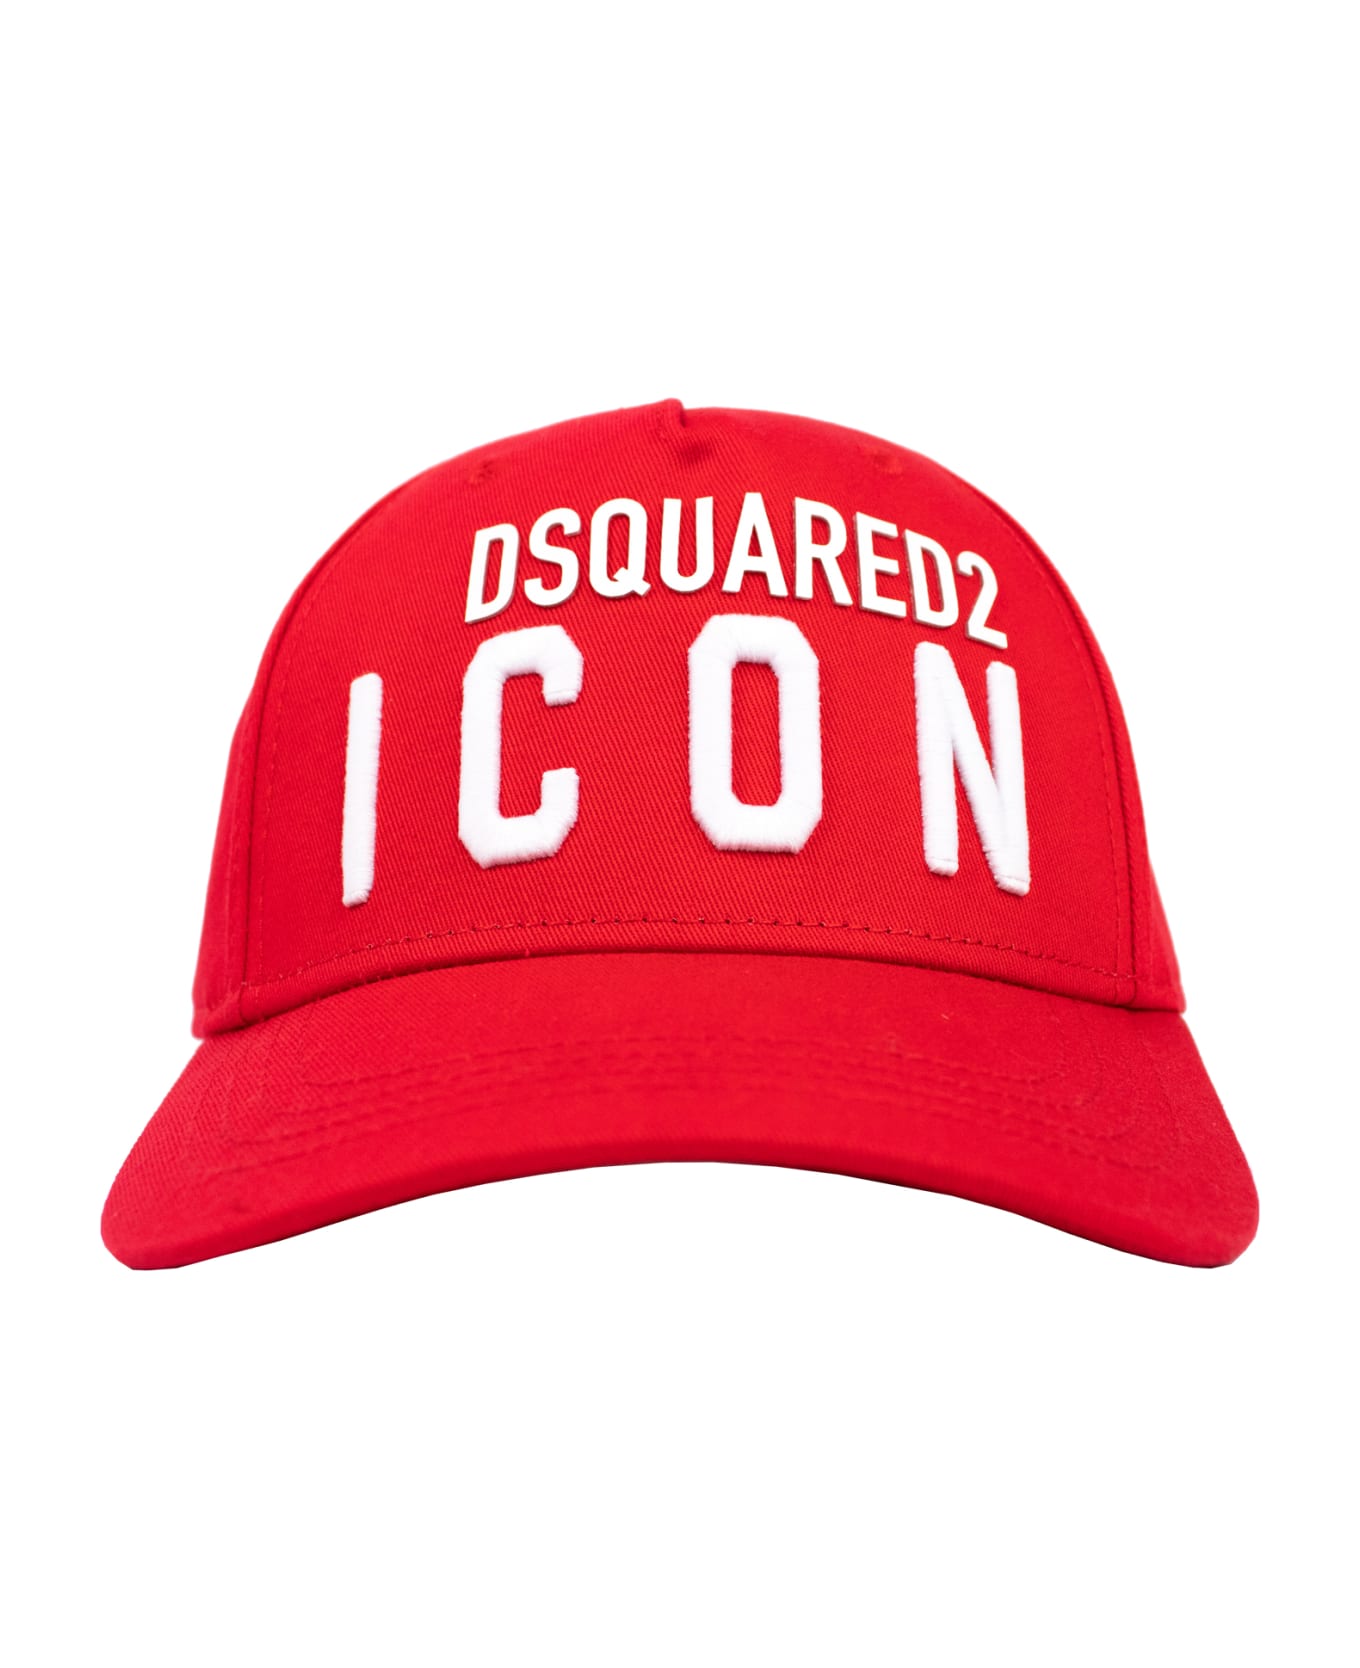 Dsquared2 "icon" Baseball Hat - Red